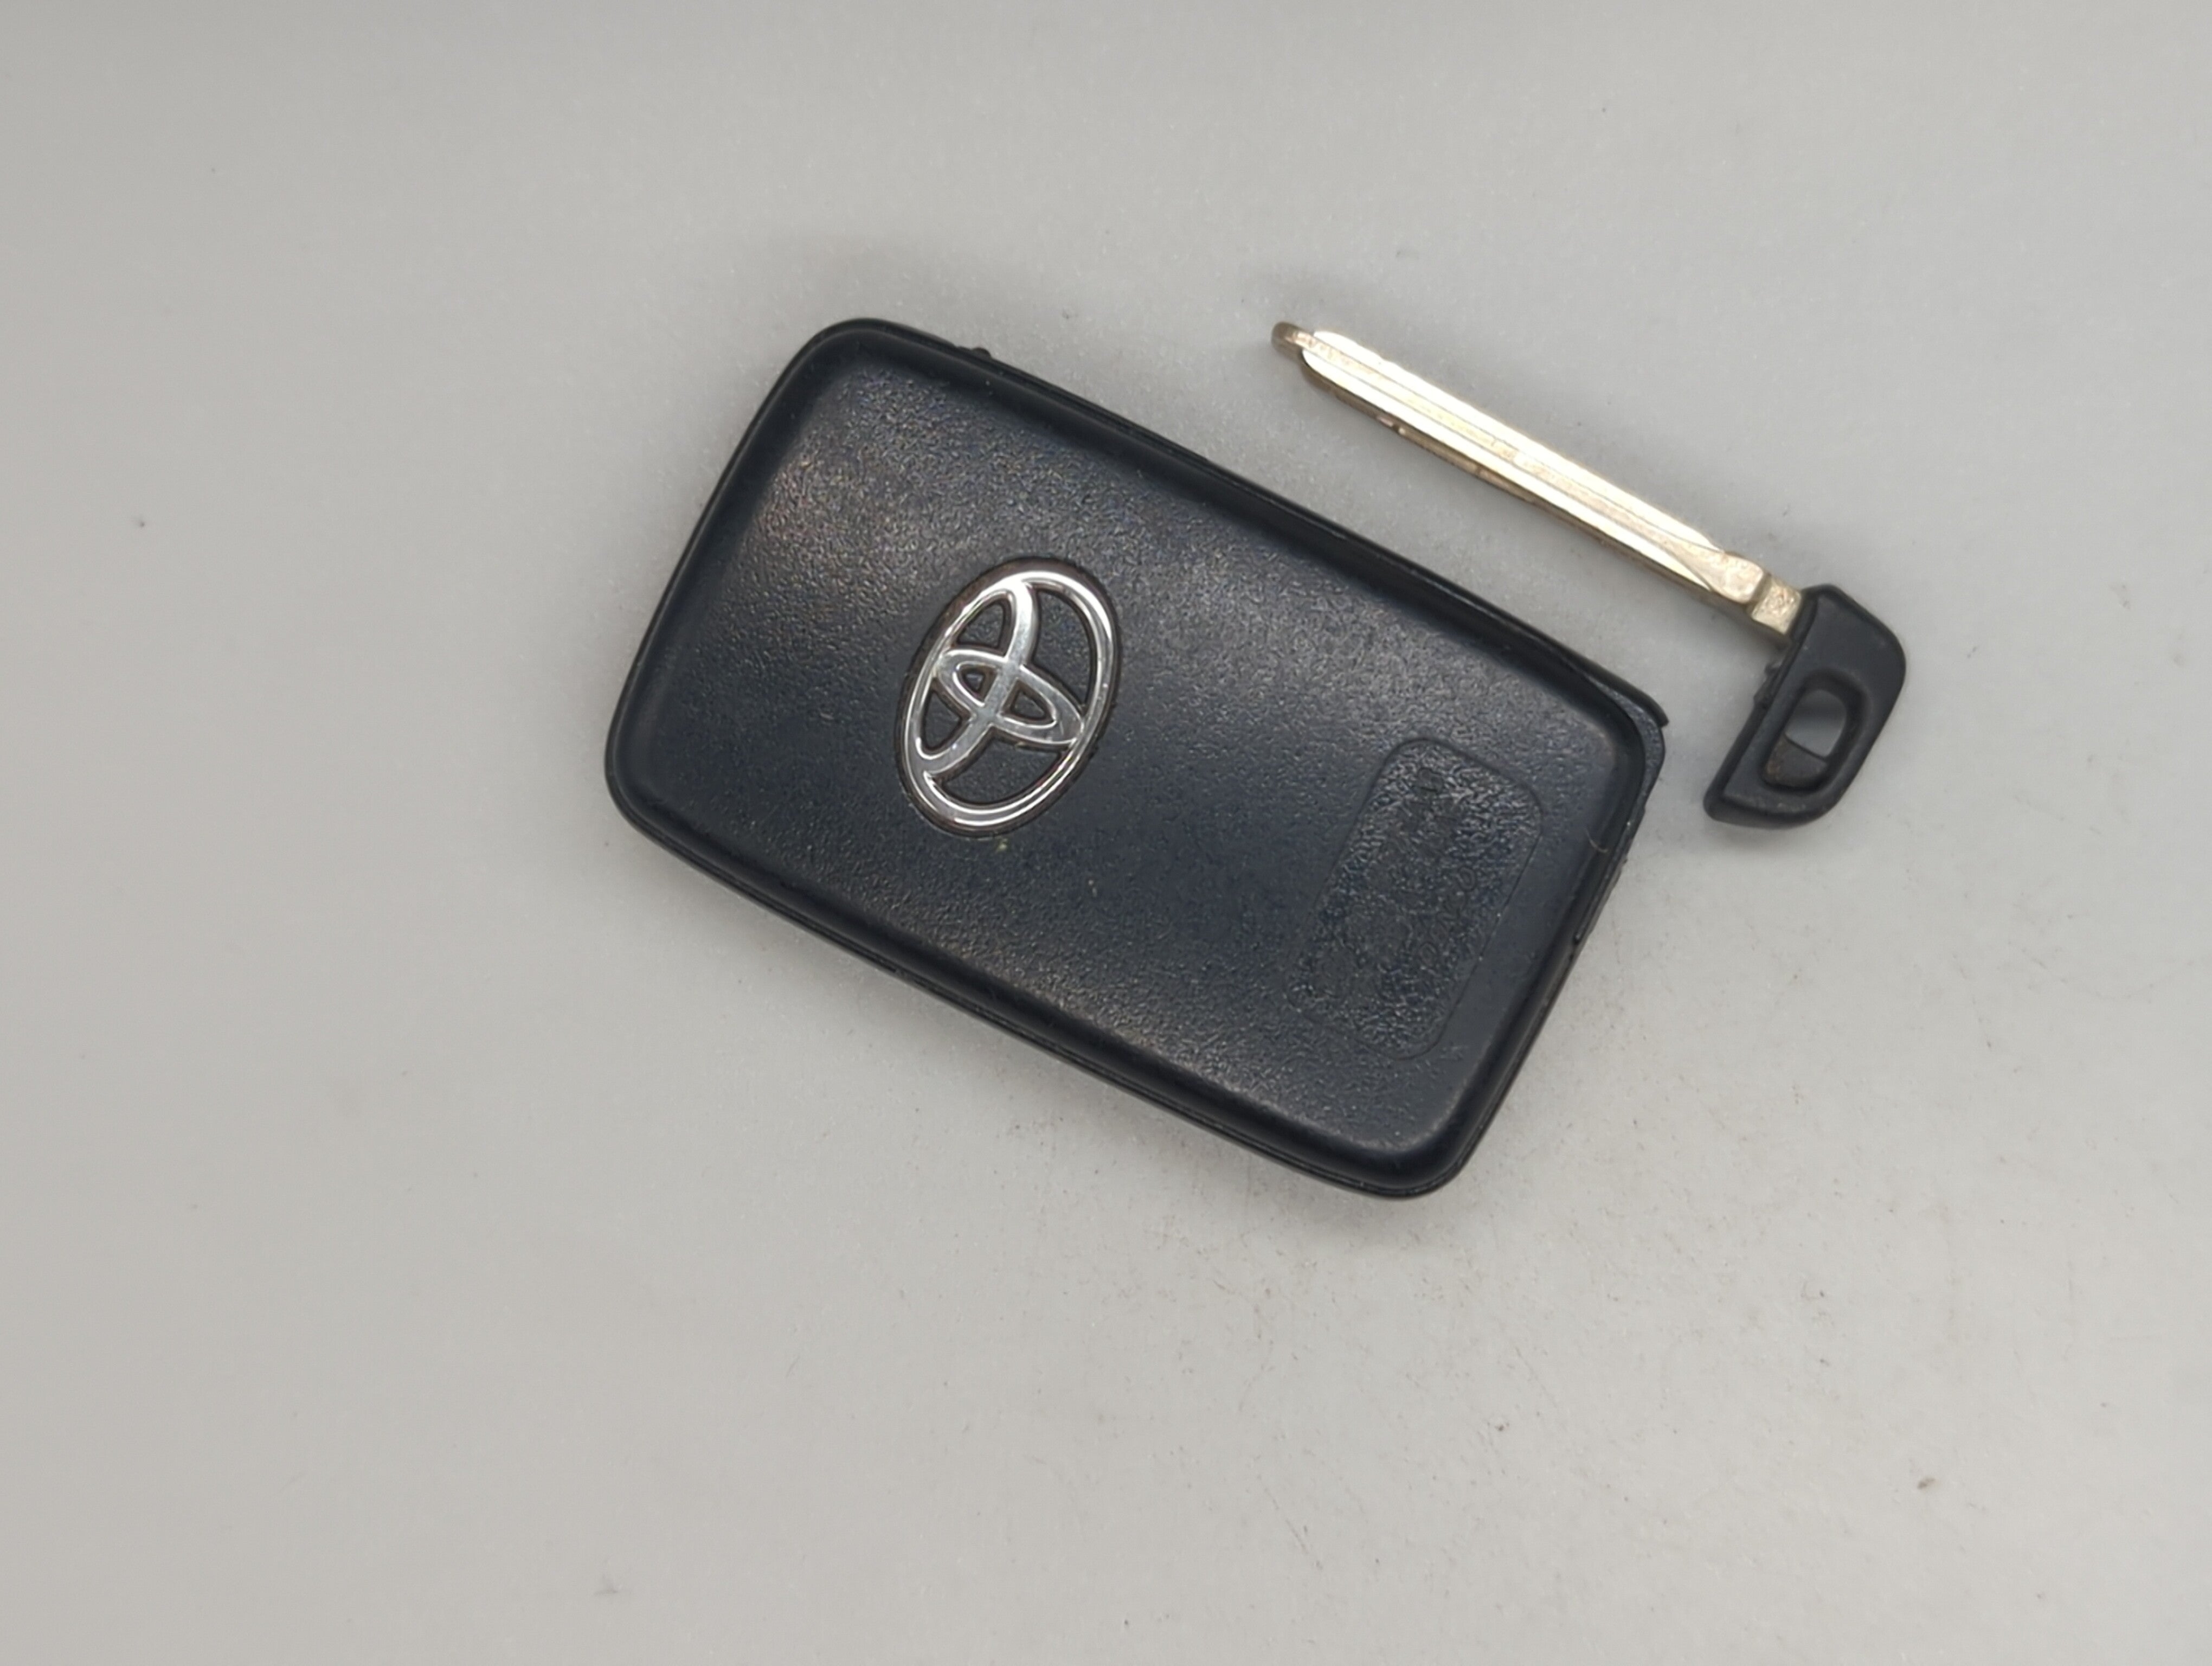 Toyota Highlander Keyless Entry Remote Fob HYQ14AAB 271451-0140 4 buttons - Oemusedautoparts1.com